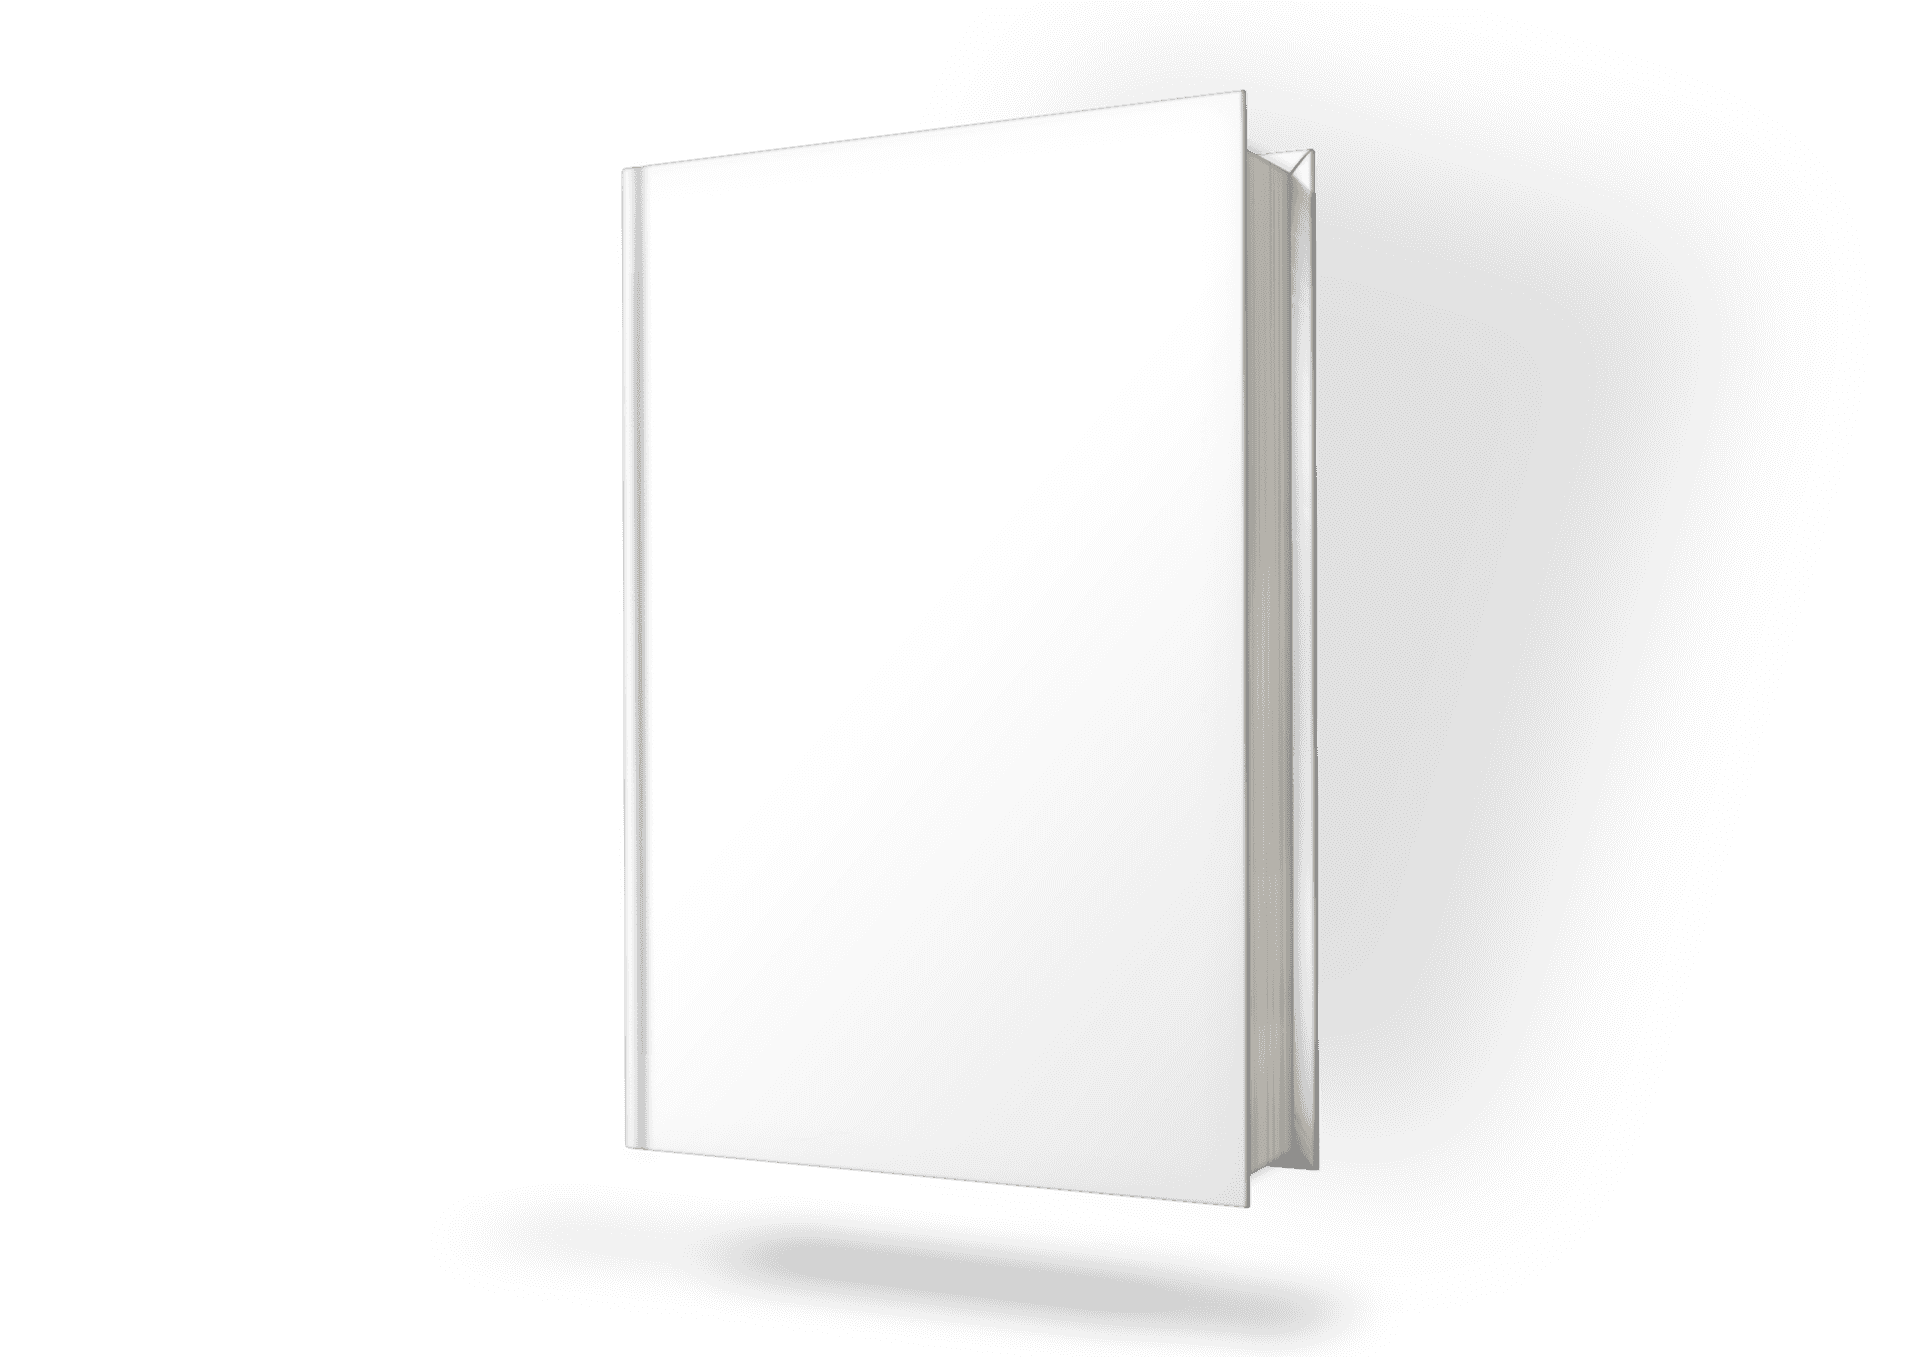 Blank Book Cover Mockup PNG